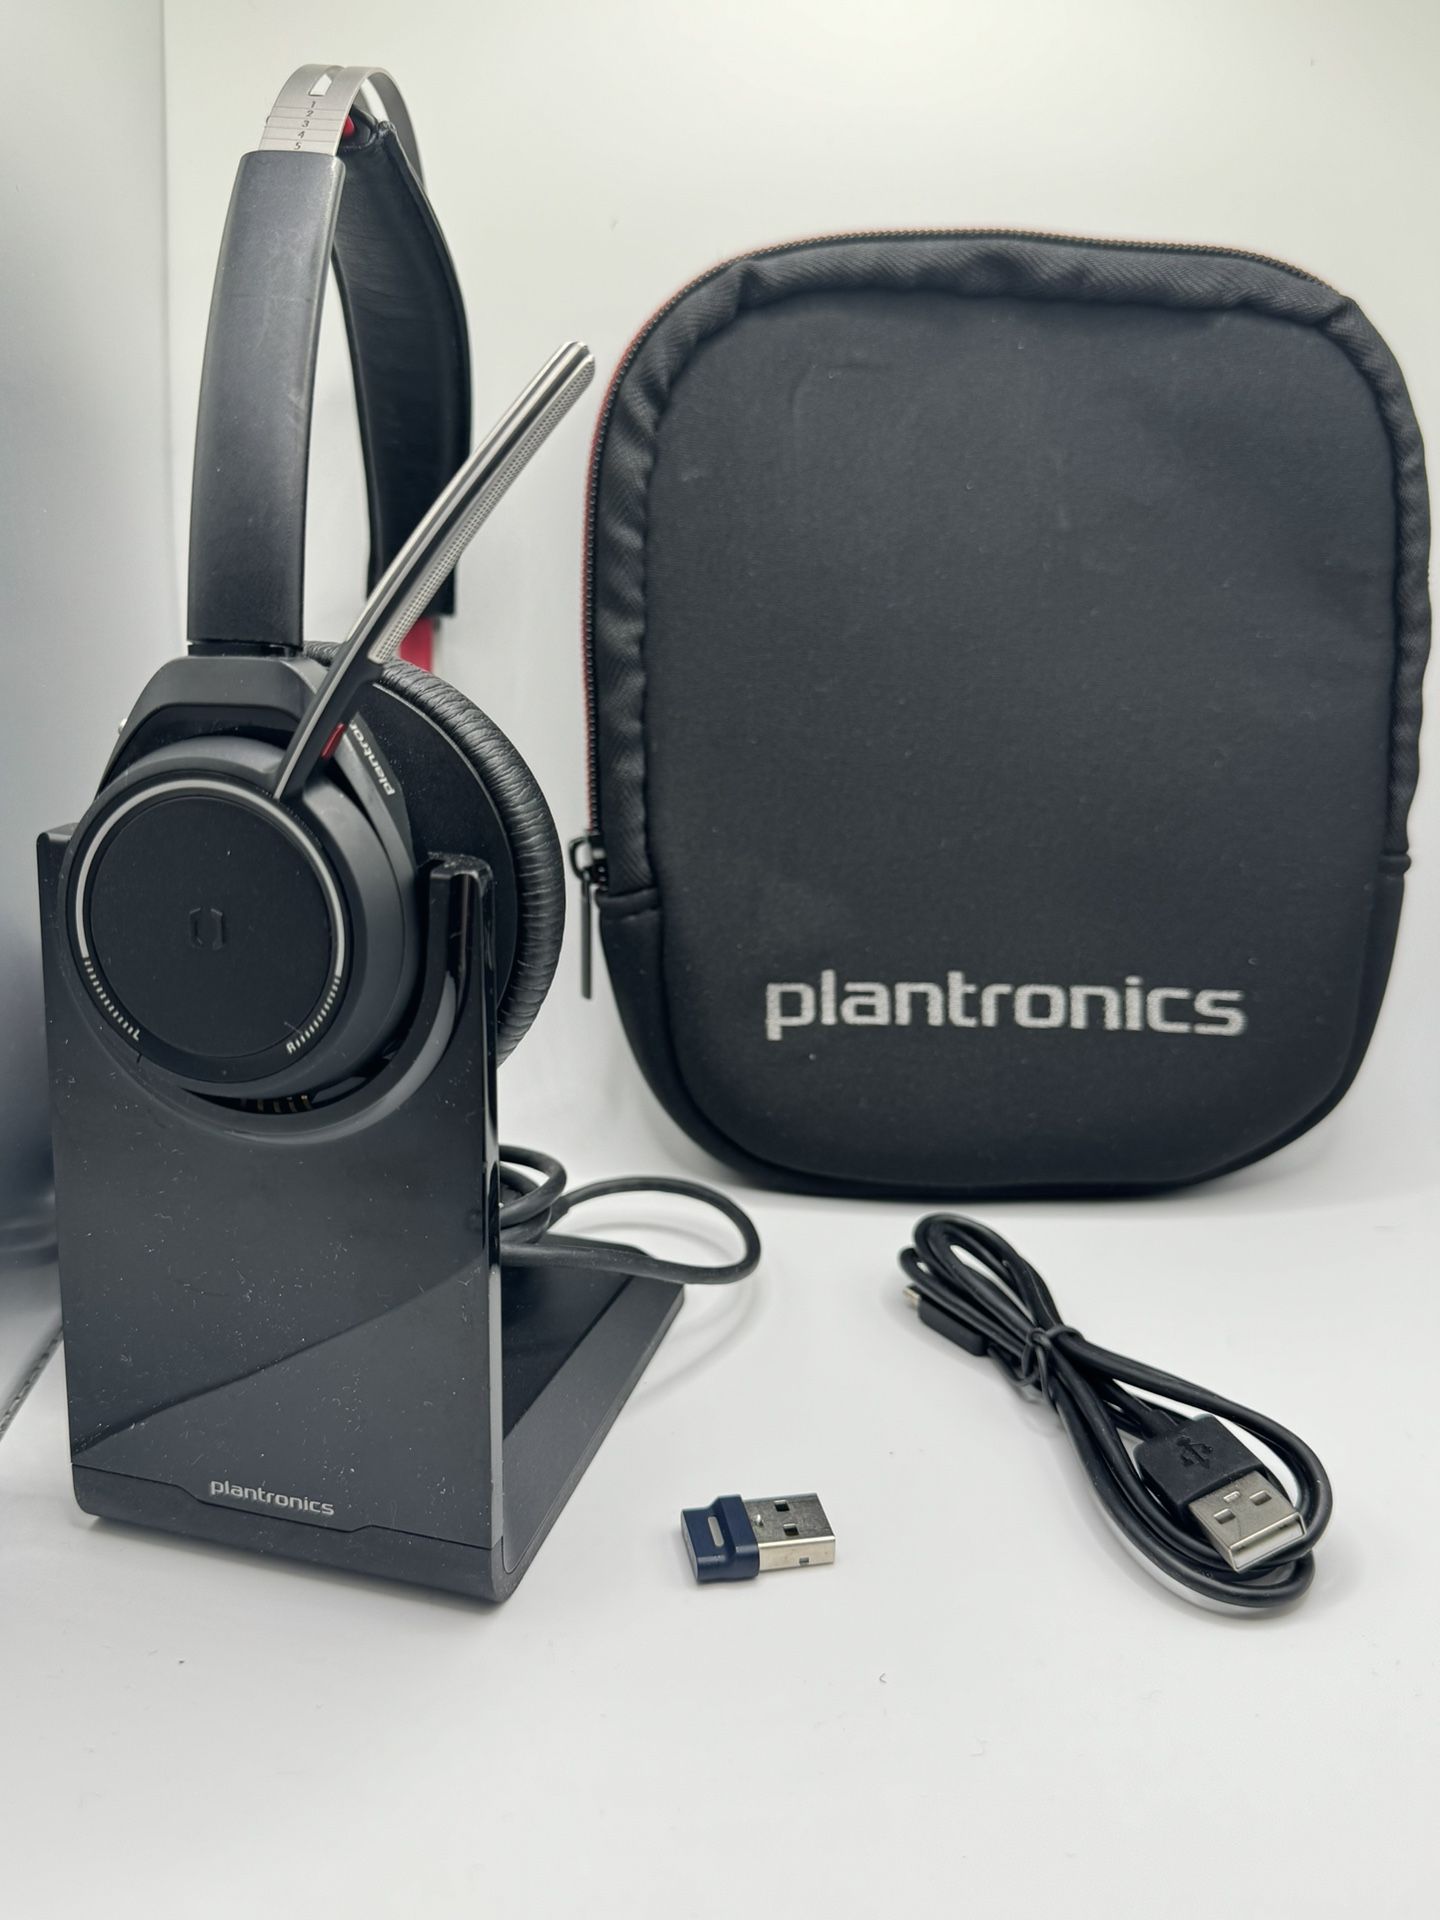 Plantronics Poly Voyager Focus UC Wireless Bluetooth Headset